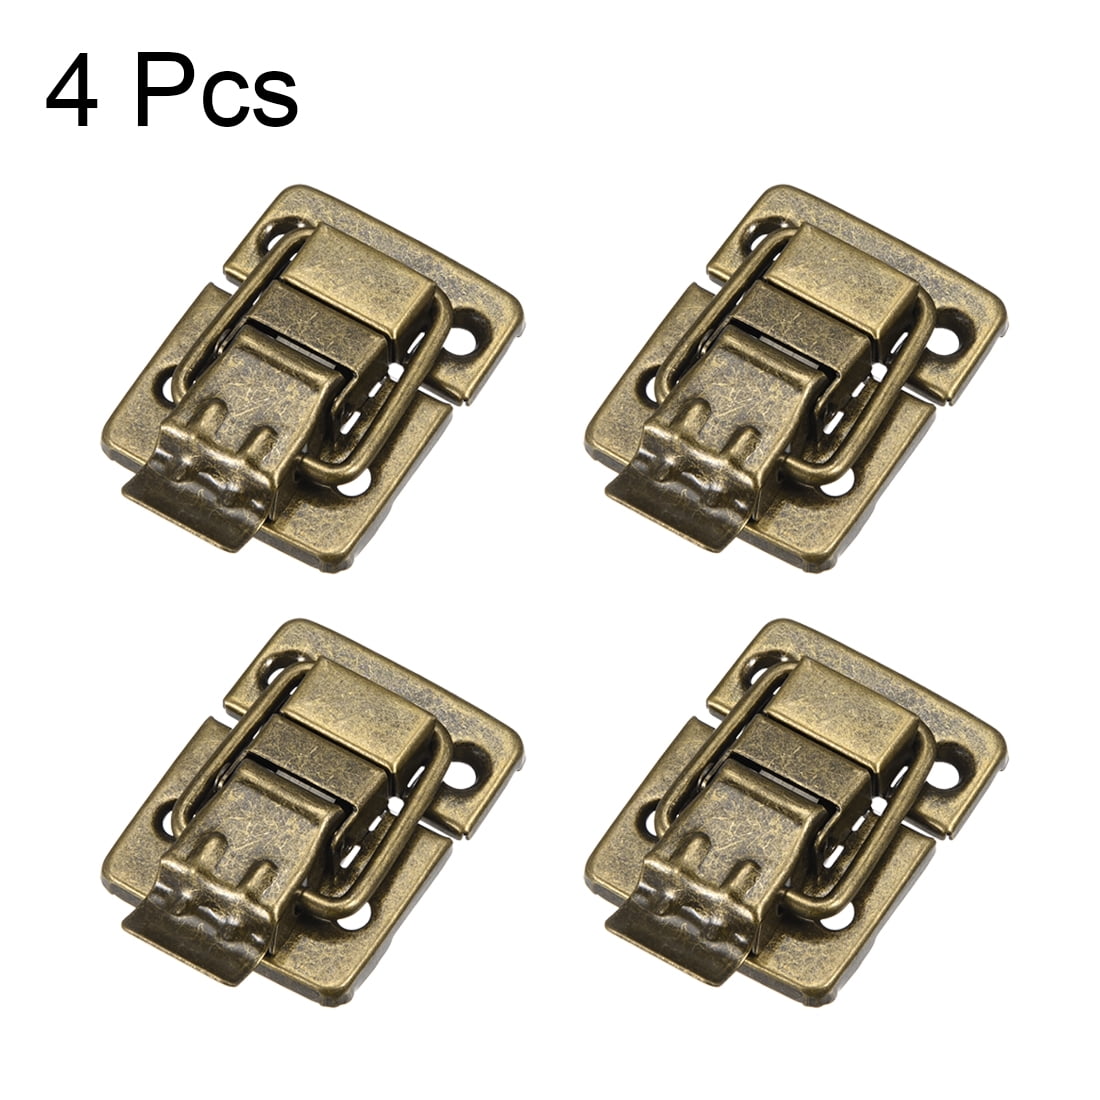 37mm x 30mm Metal Small Size Suitcase Hasp Catch Latch with Screws 2 Pcs 